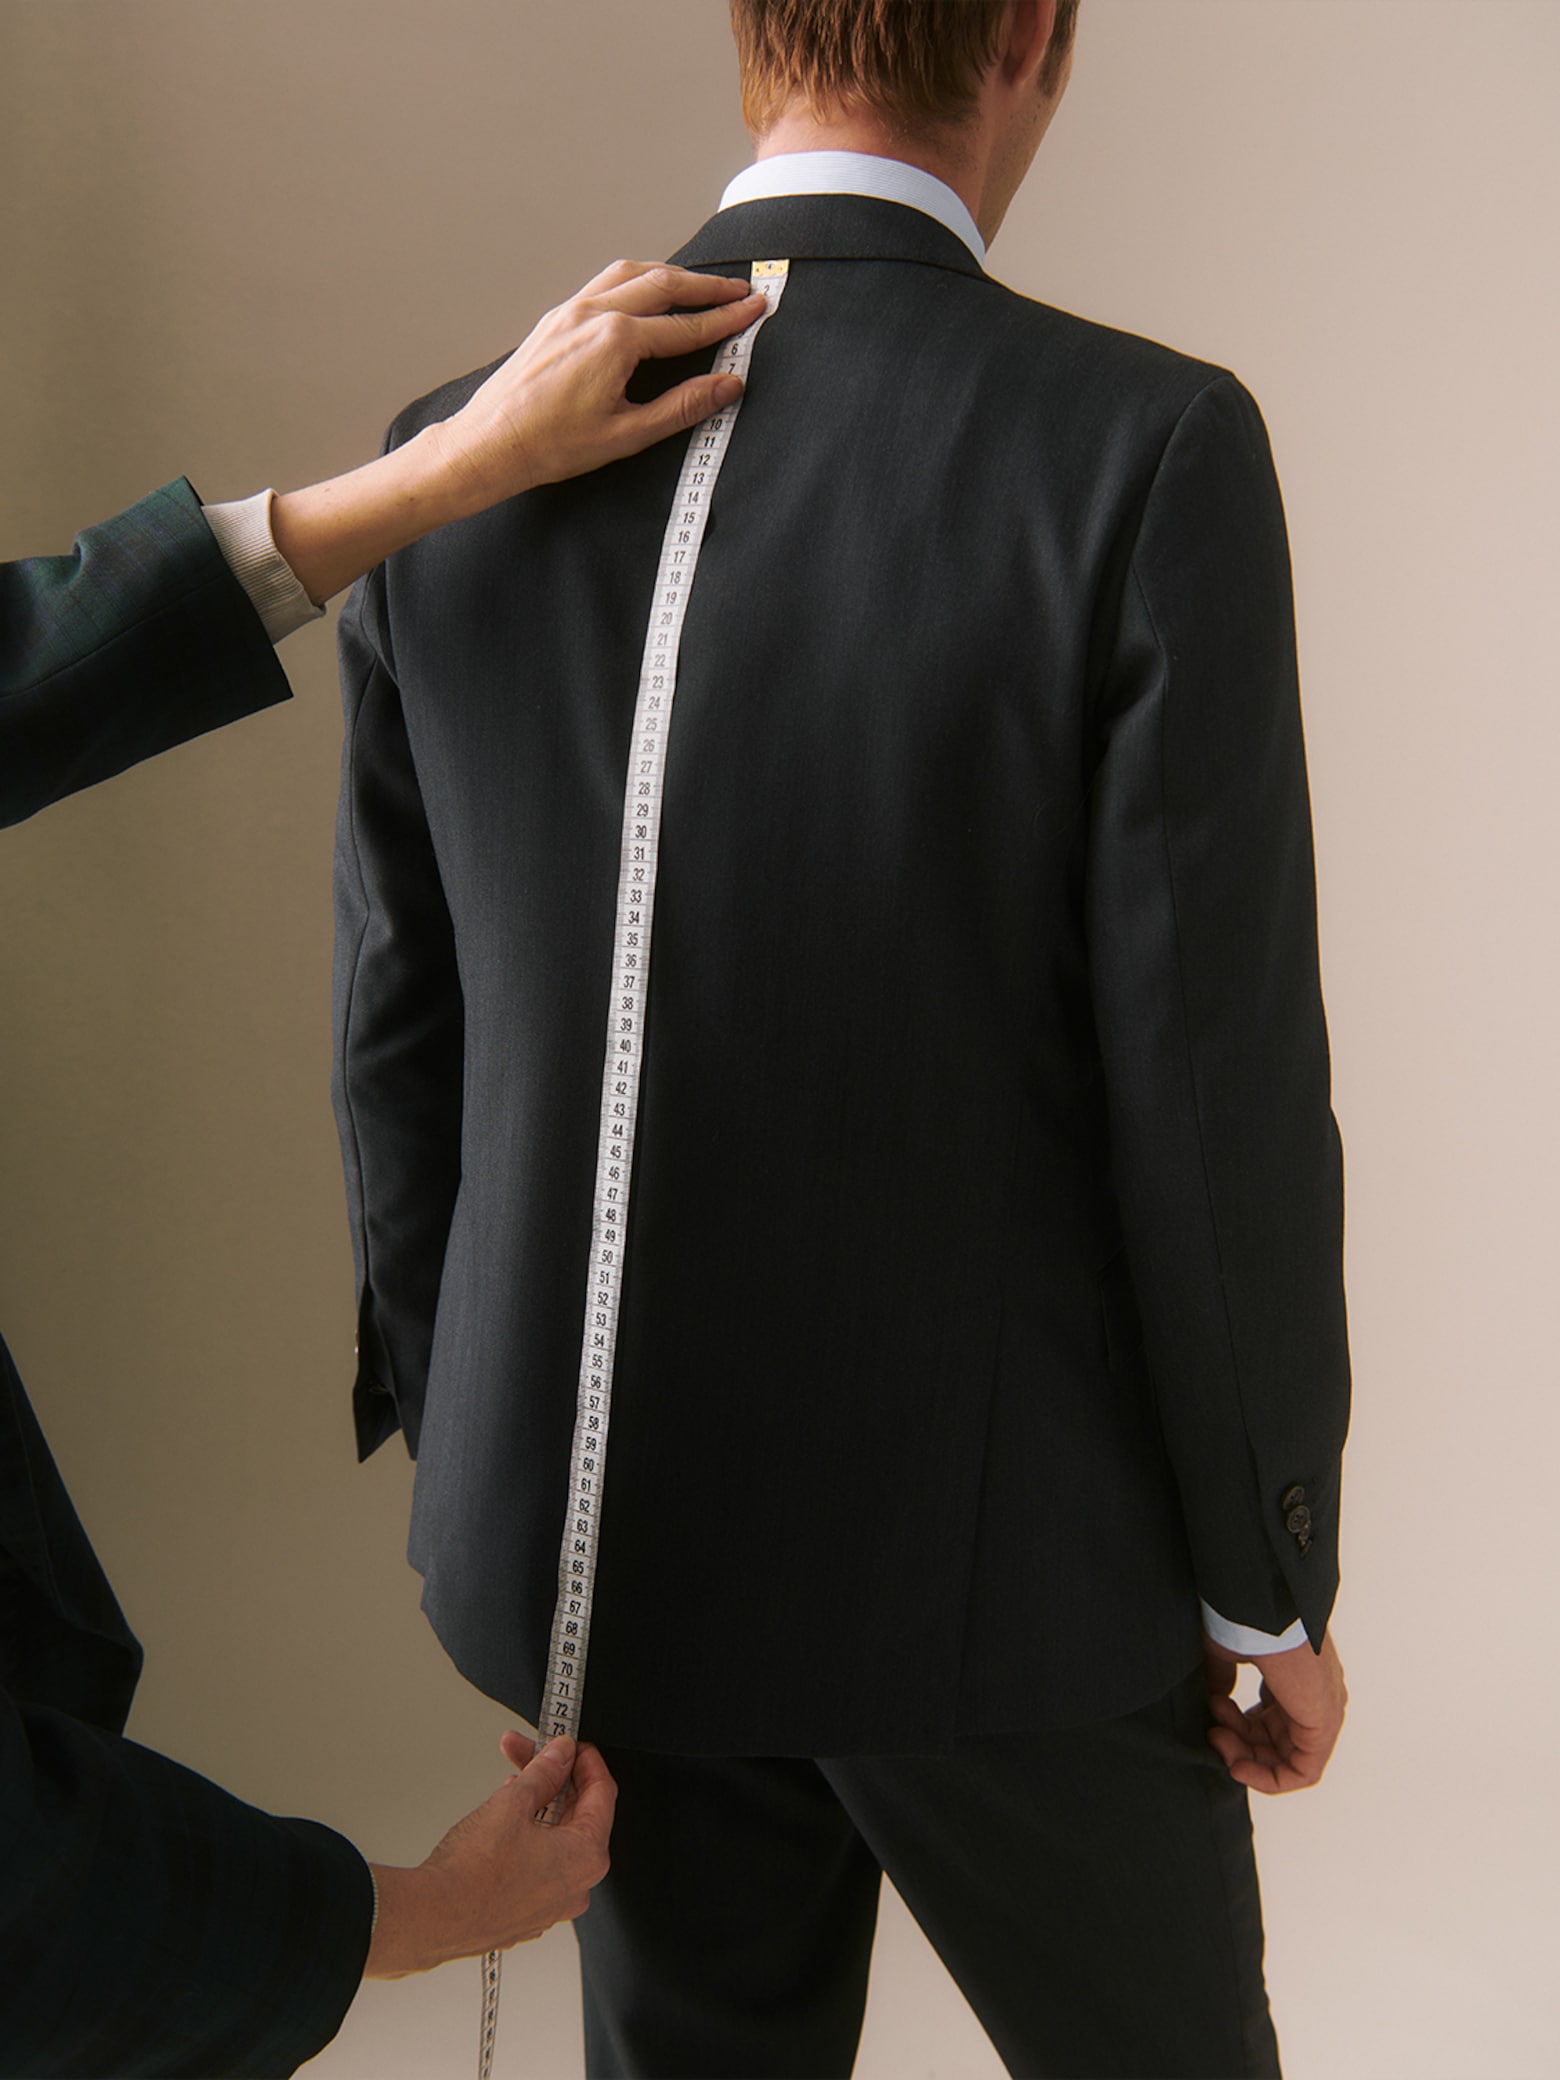 What’s your size? How to measure for your suit